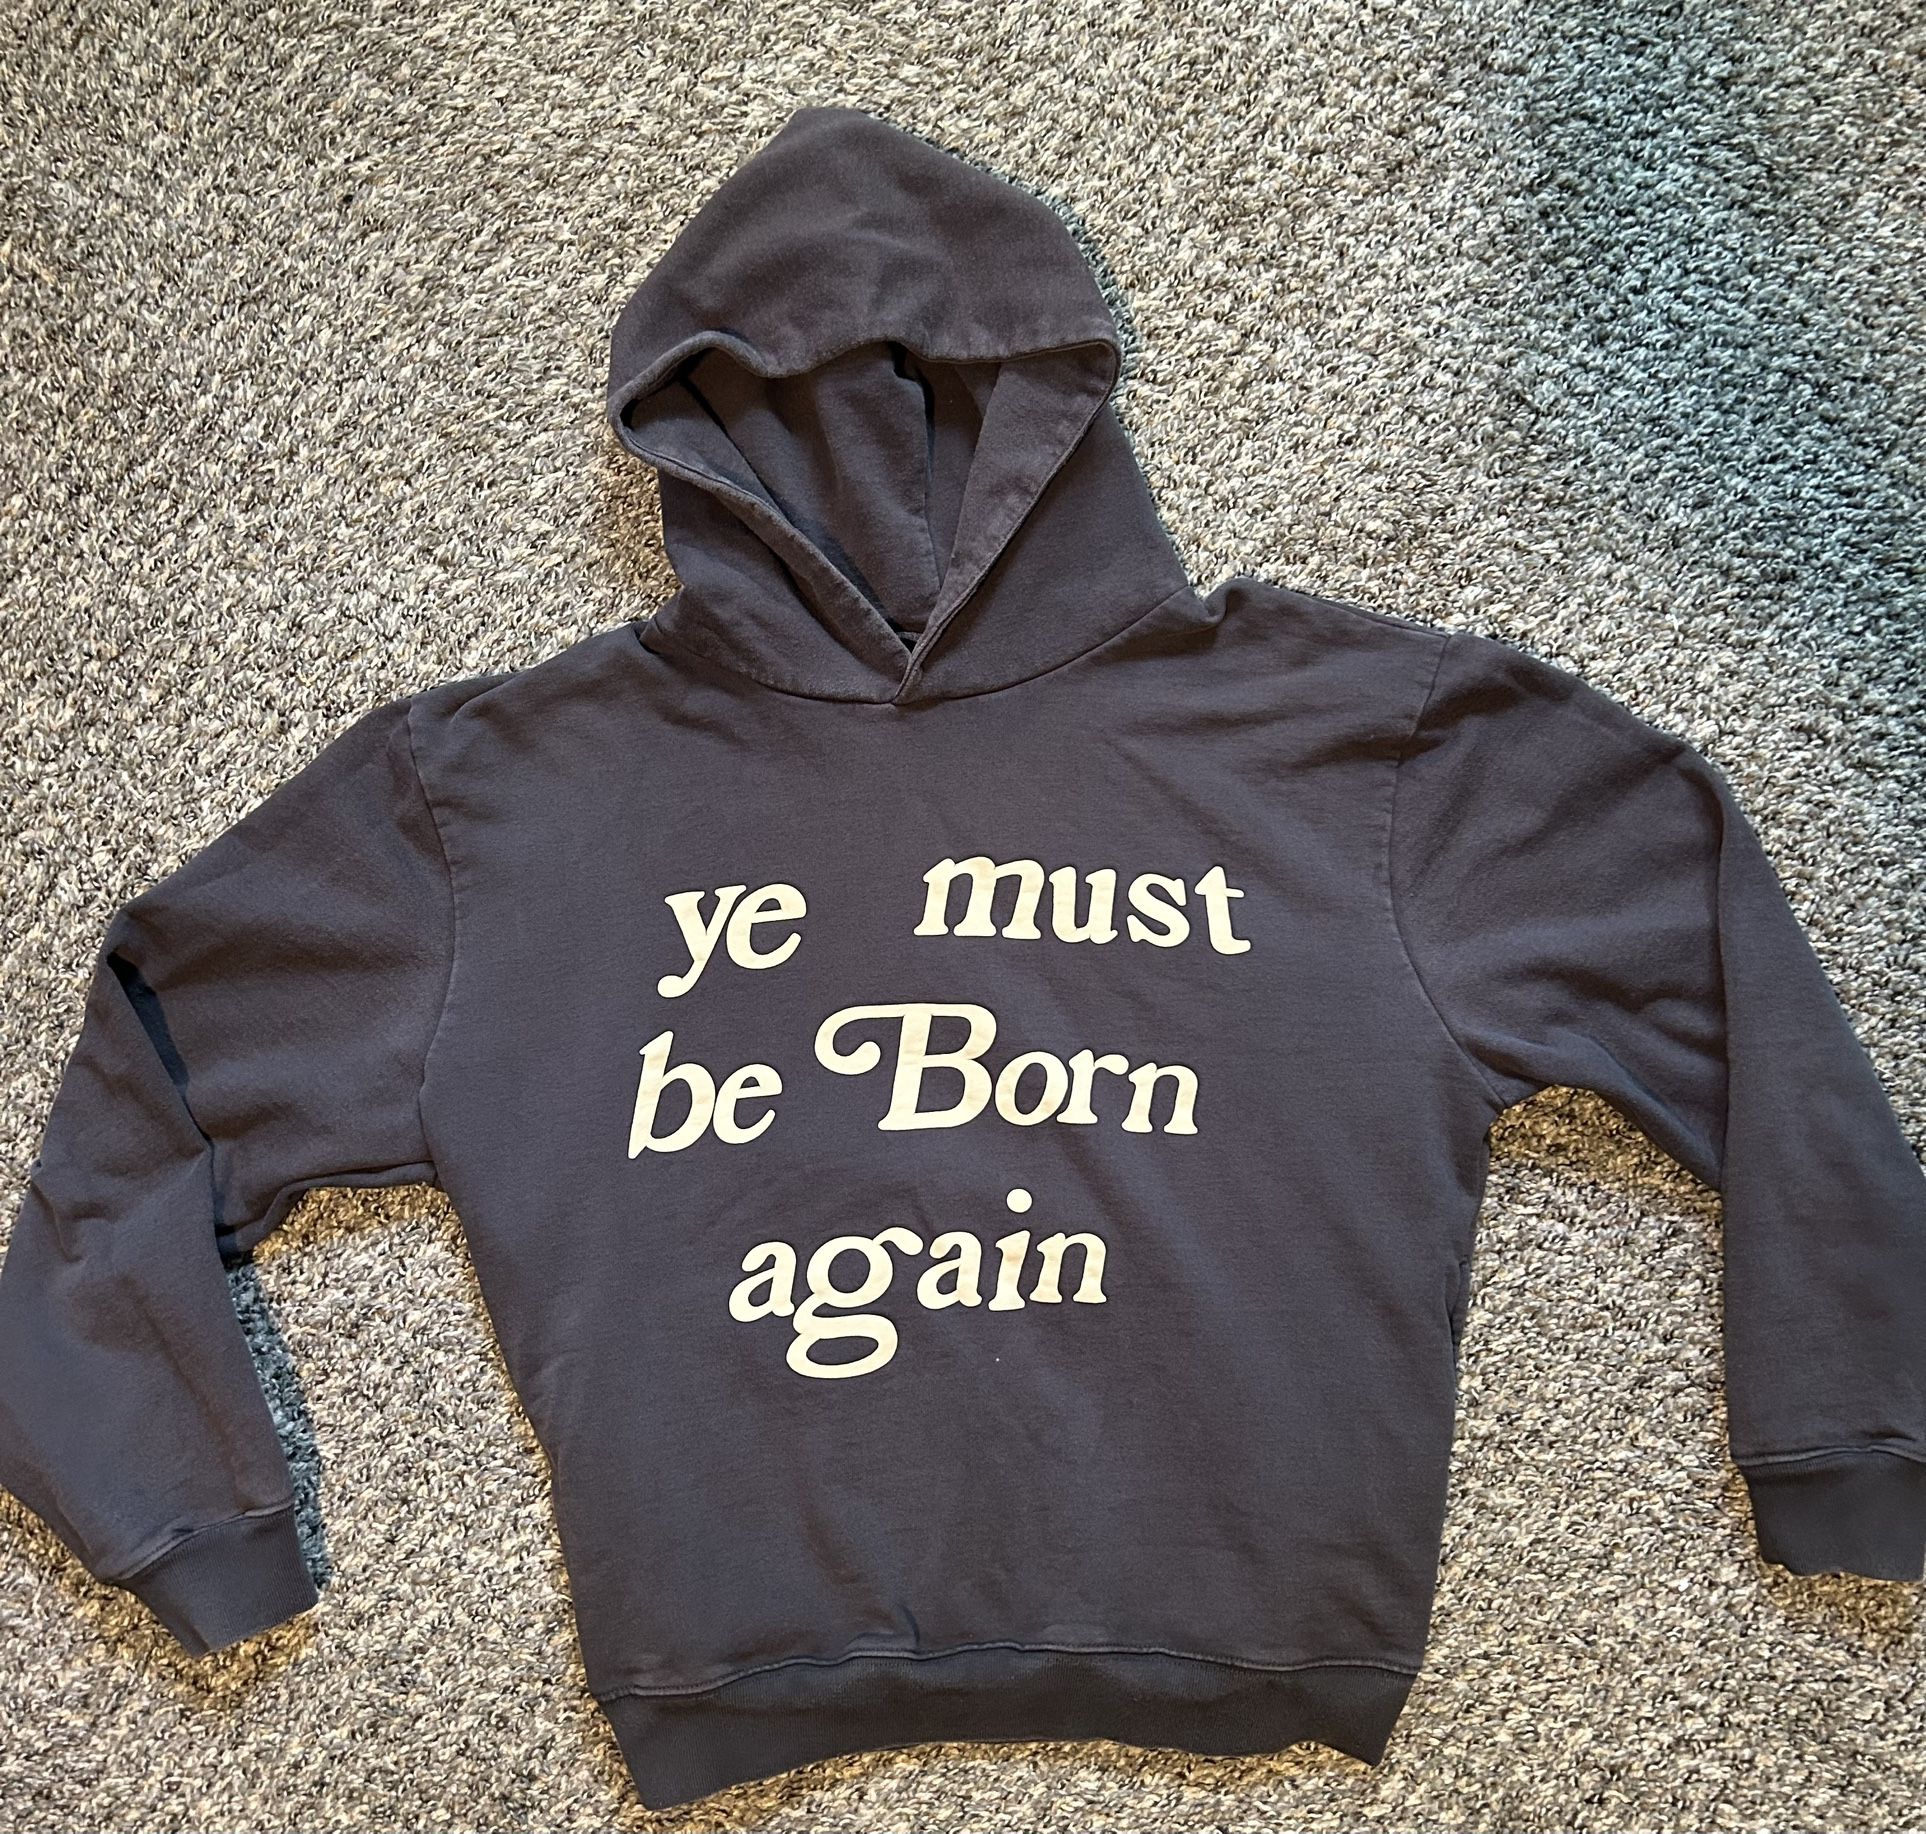 Cactus Plant Flea Market “ye must be born again” hoodie. Size small.